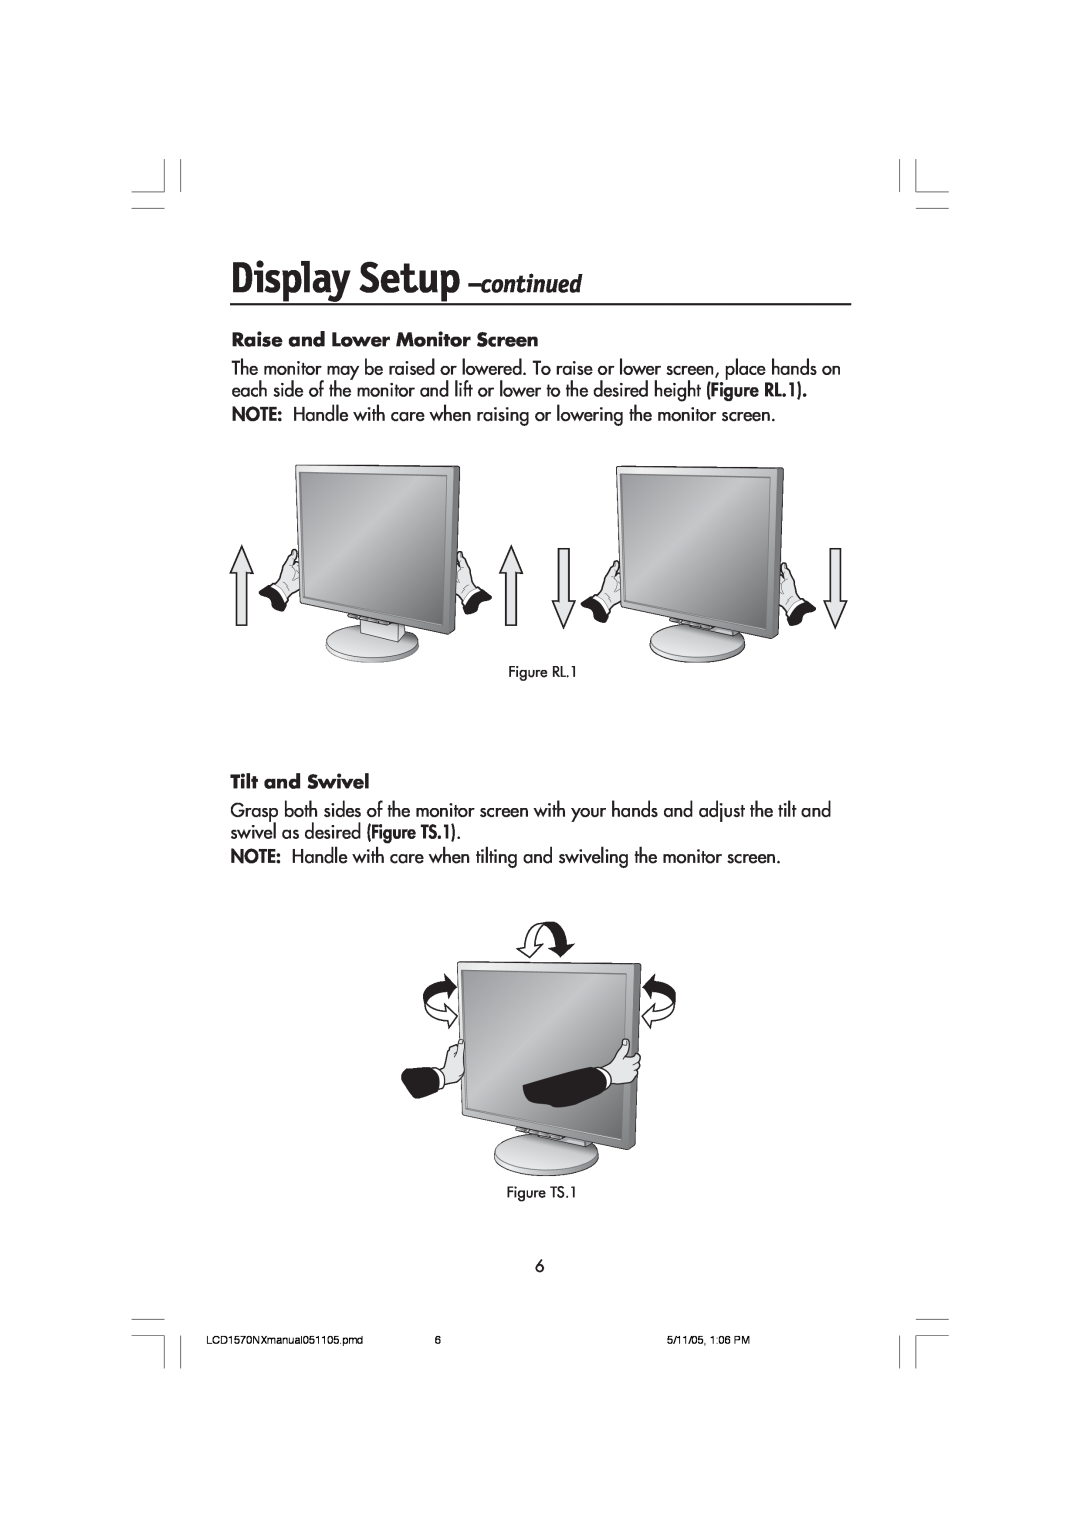 NEC LCD1570NX user manual Raise and Lower Monitor Screen, Tilt and Swivel, Display Setup -continued 